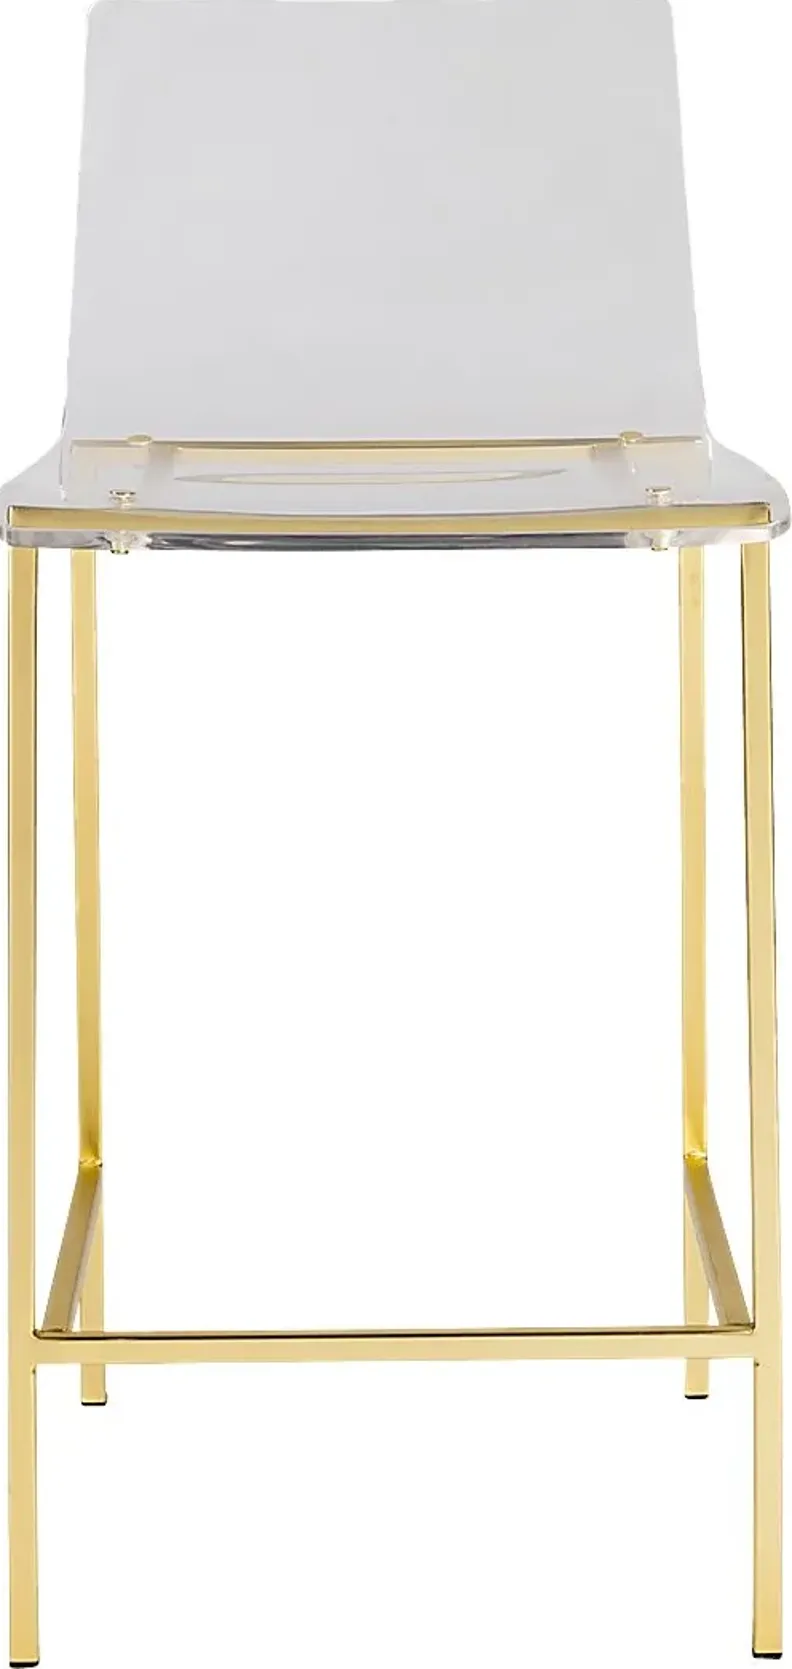 Crownhardt Gold Counter Stool, Set of 2